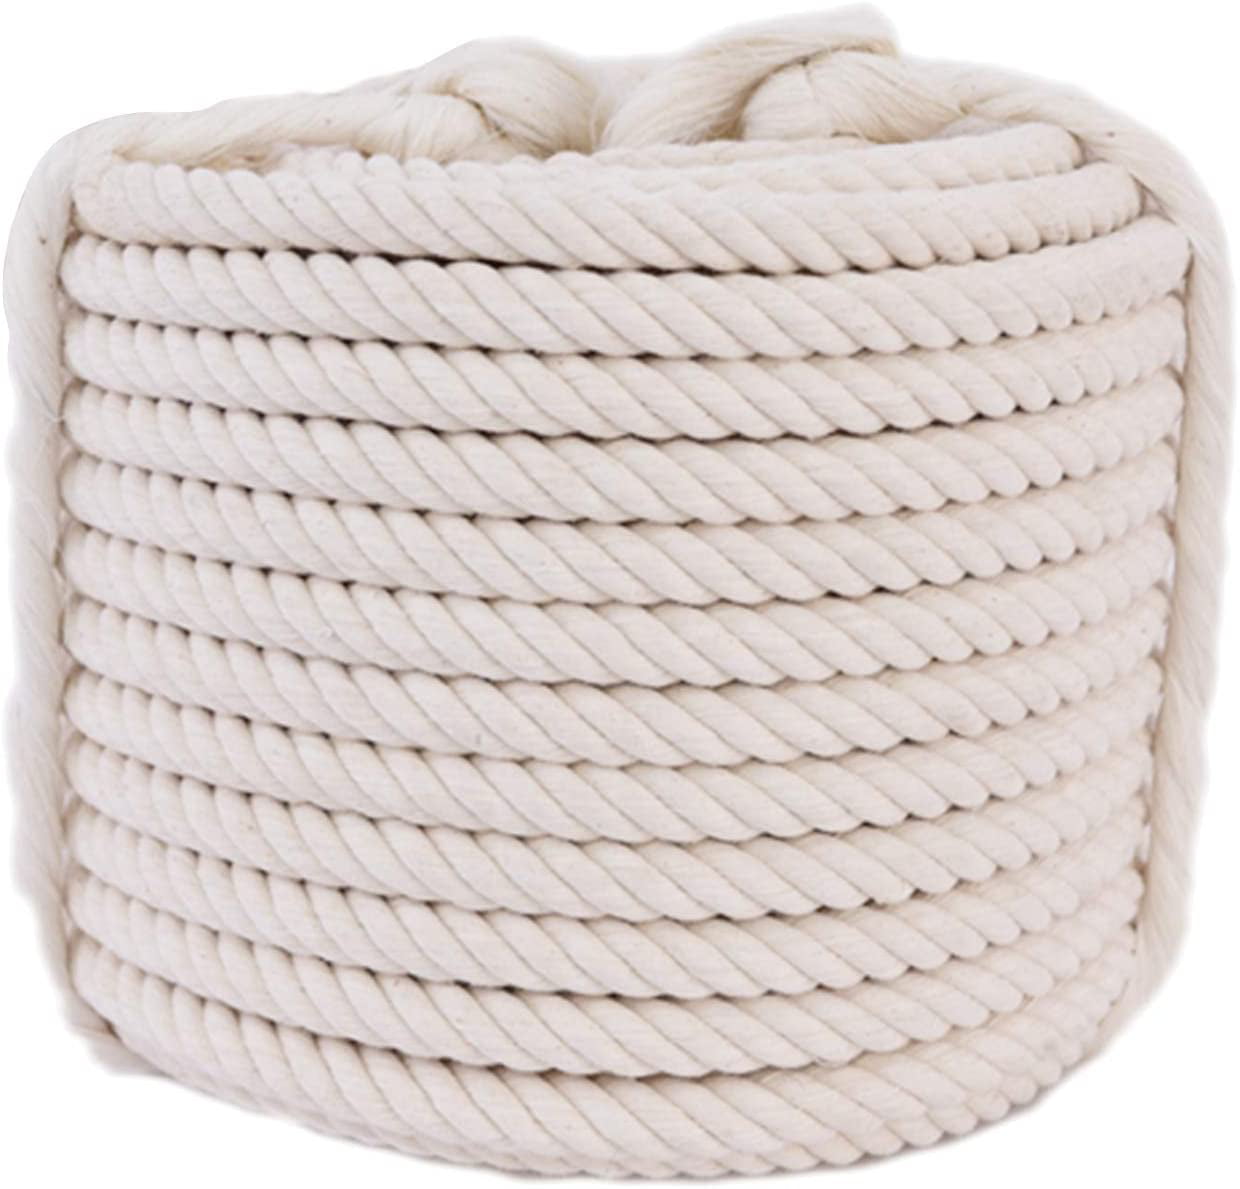 25/50/100 feet 1/2" inch Cotton Twisted Cord Rope Crafts Macrame Artisan String 